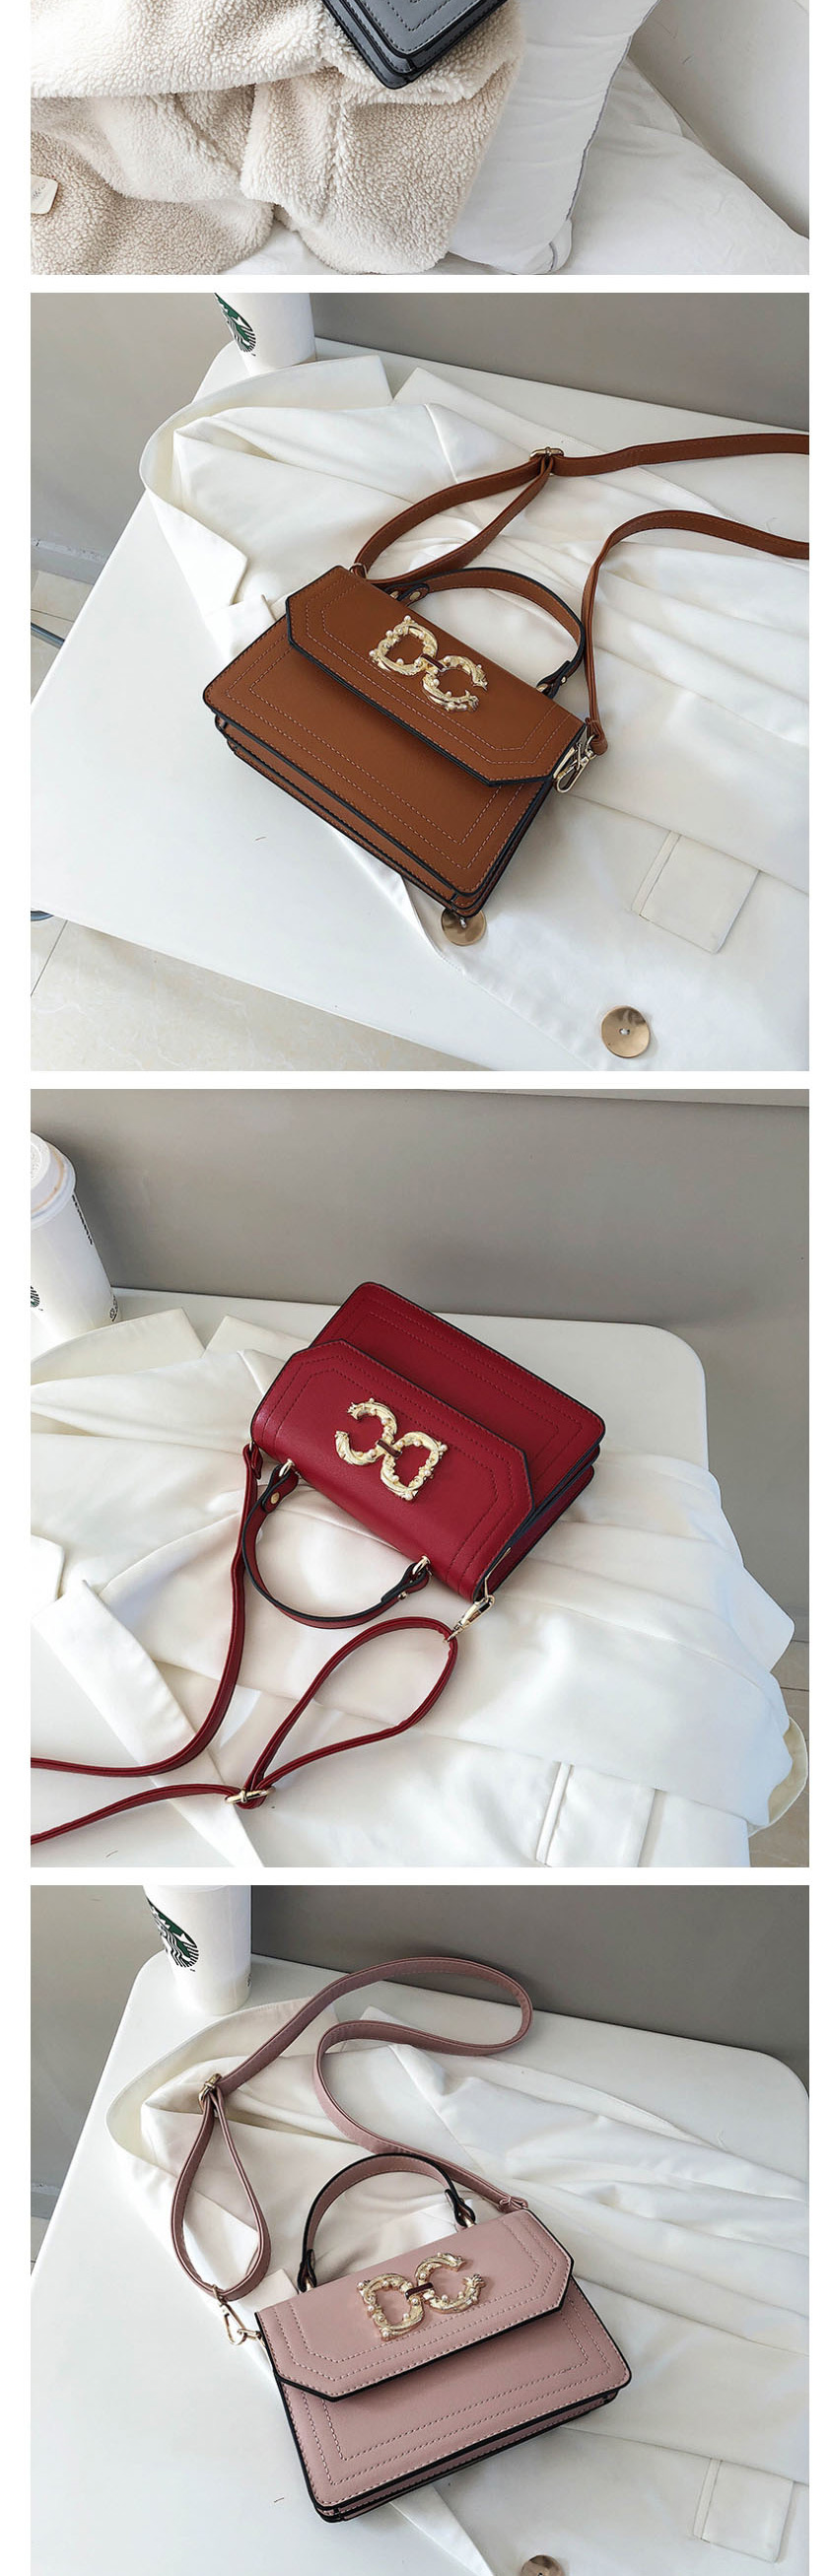 Fashion Red Flap Stitched Crossbody Bag,Shoulder bags